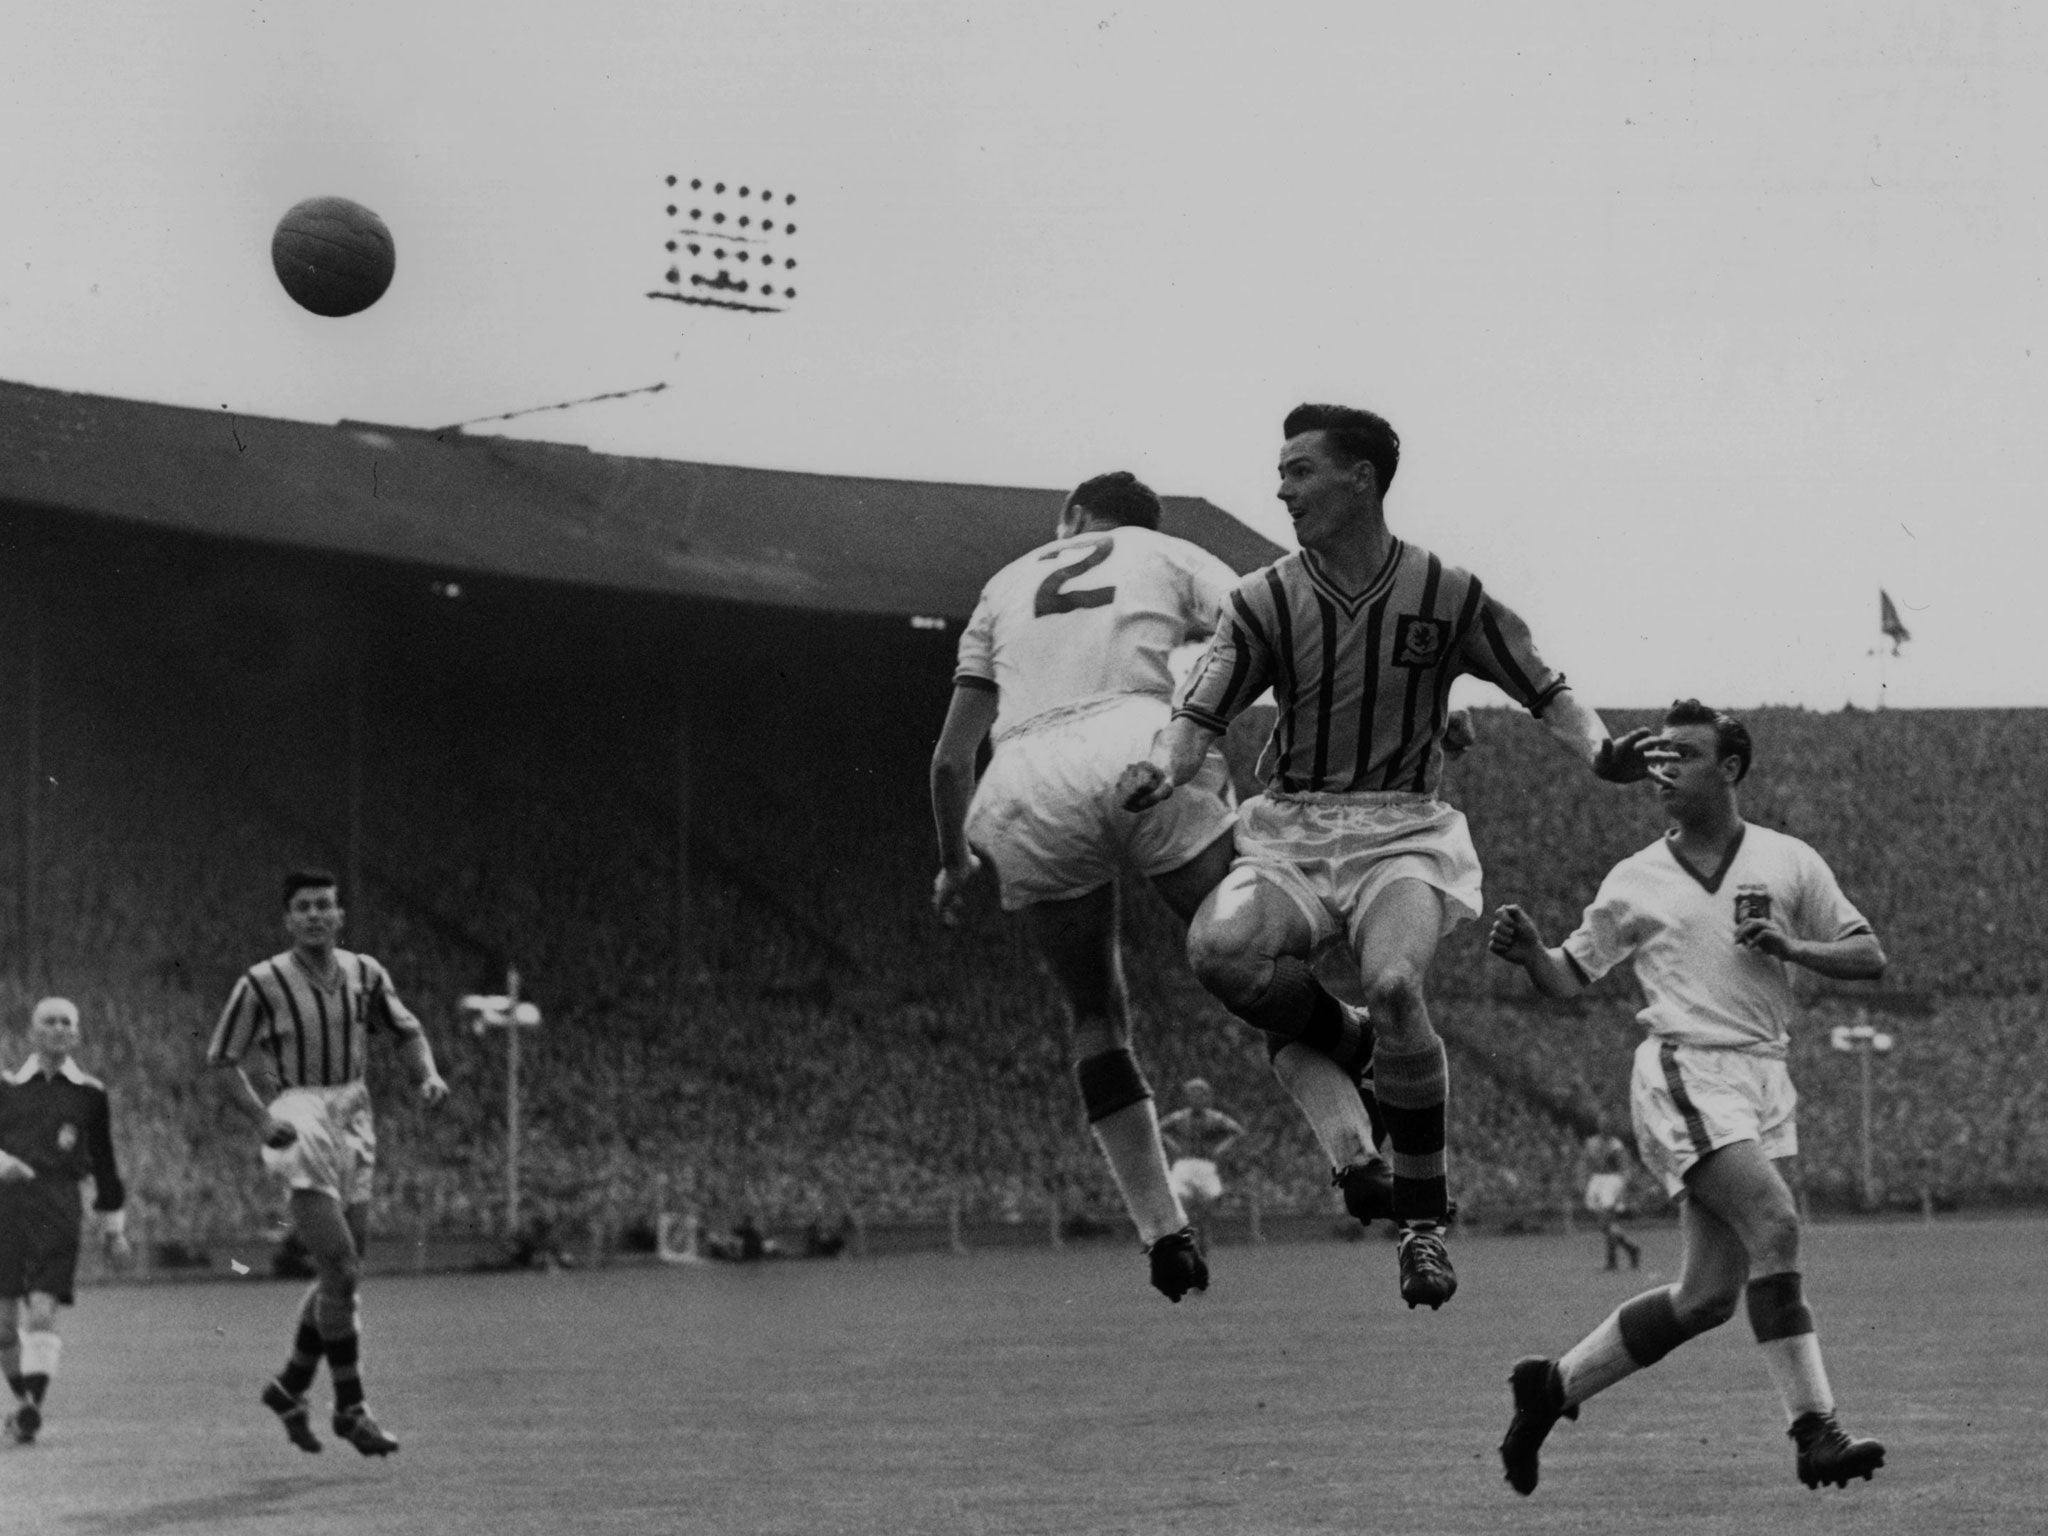 Peter McParland, pictured here in a game in 1957, scored the winning goal for Villa in the final